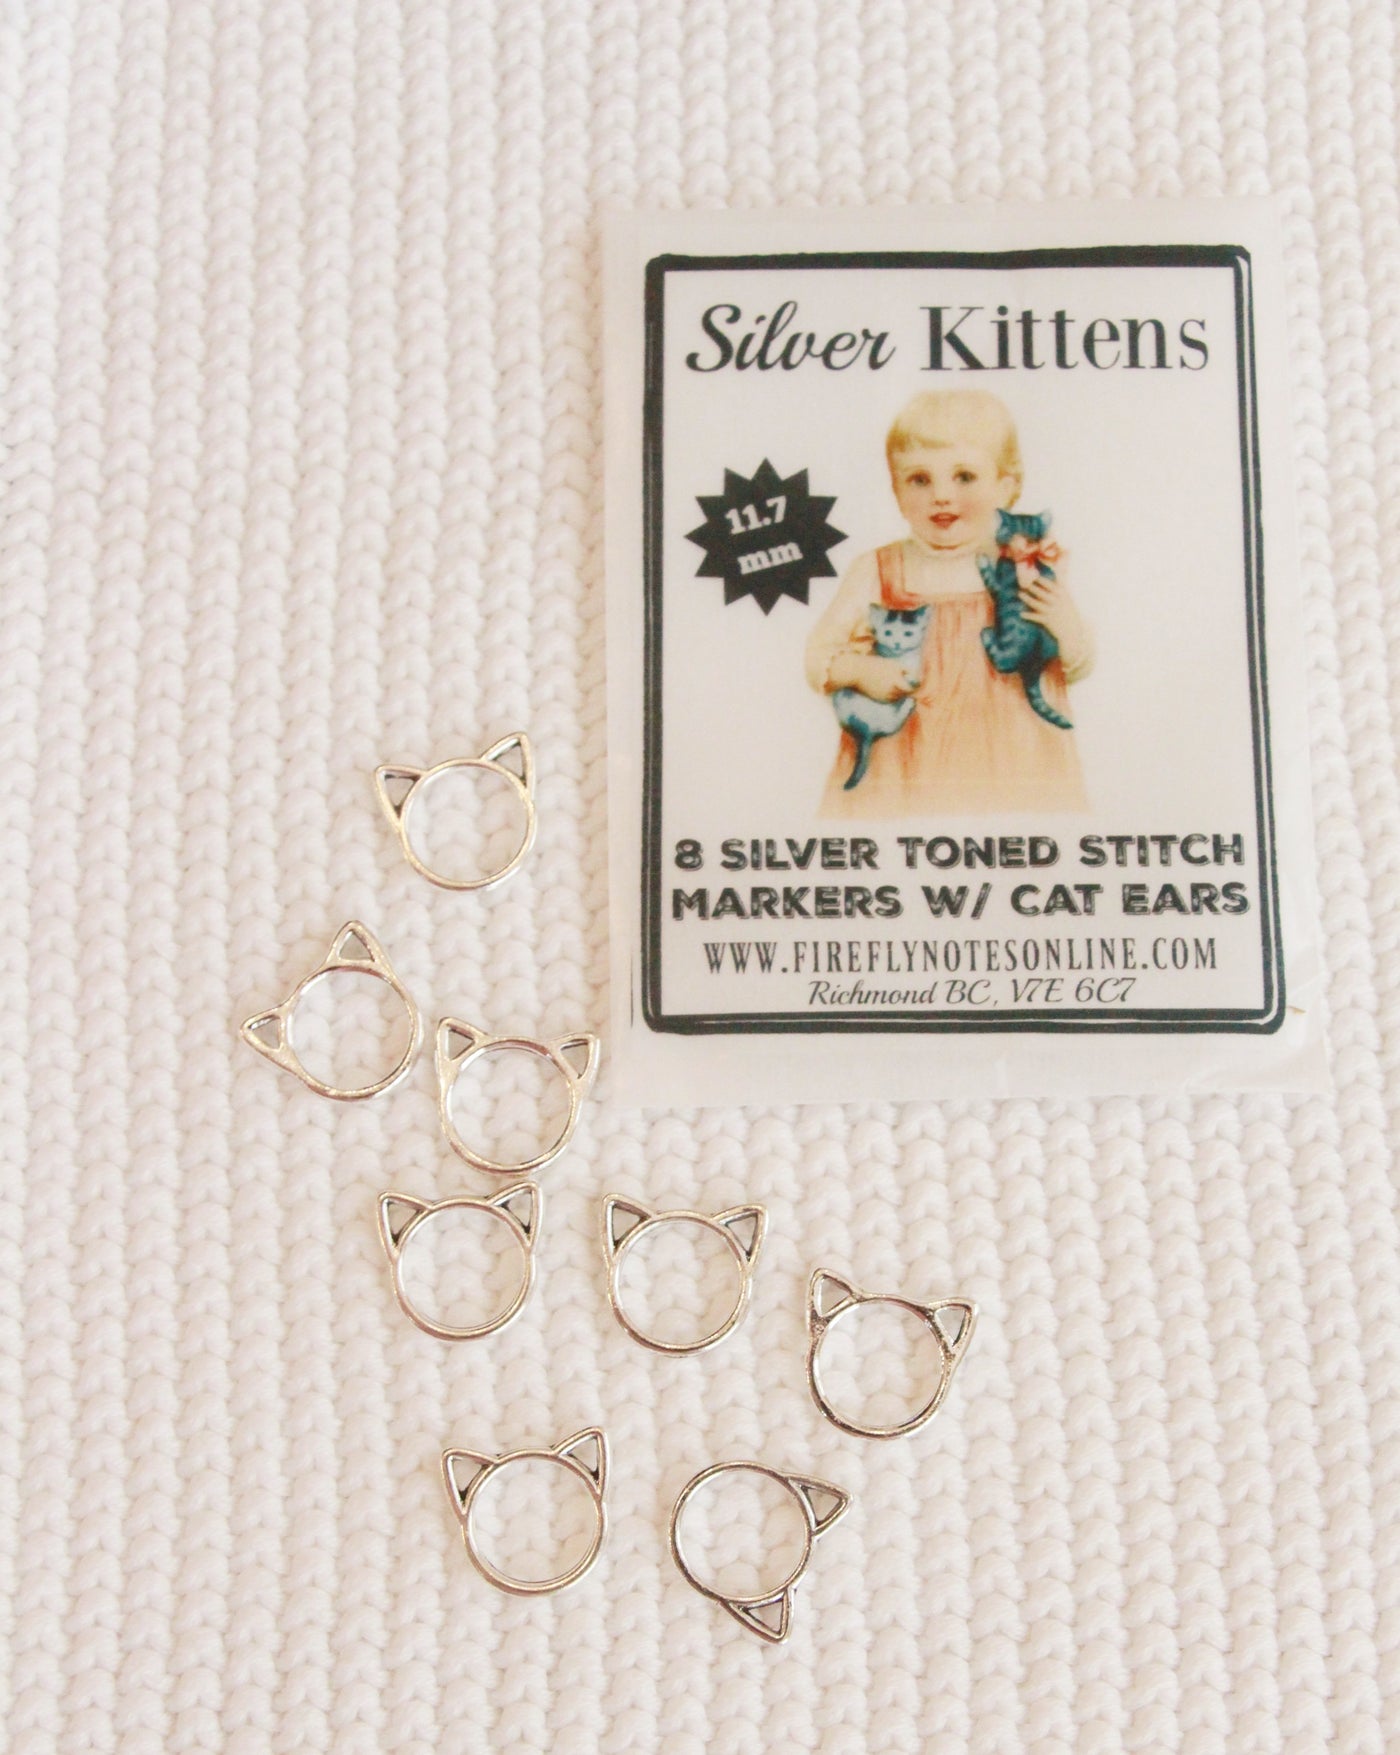 Silver Kittens Stitchmarkers